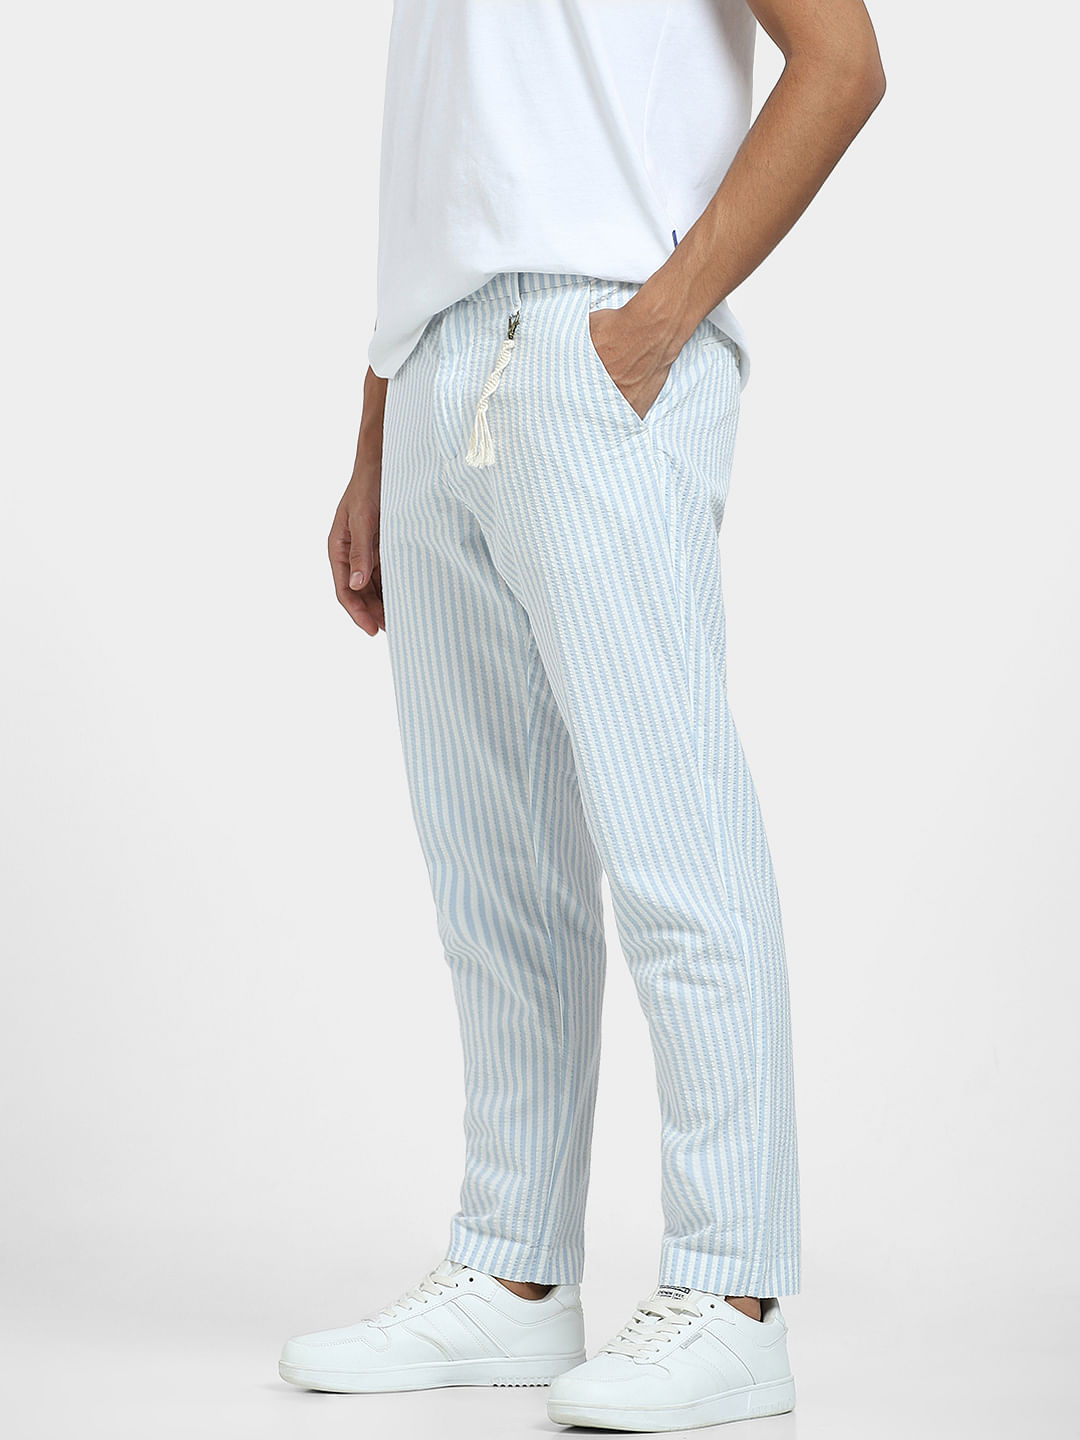 Blue Striped Mens Tapered Linen Pants Trousers Relaxed Fit - Cholp